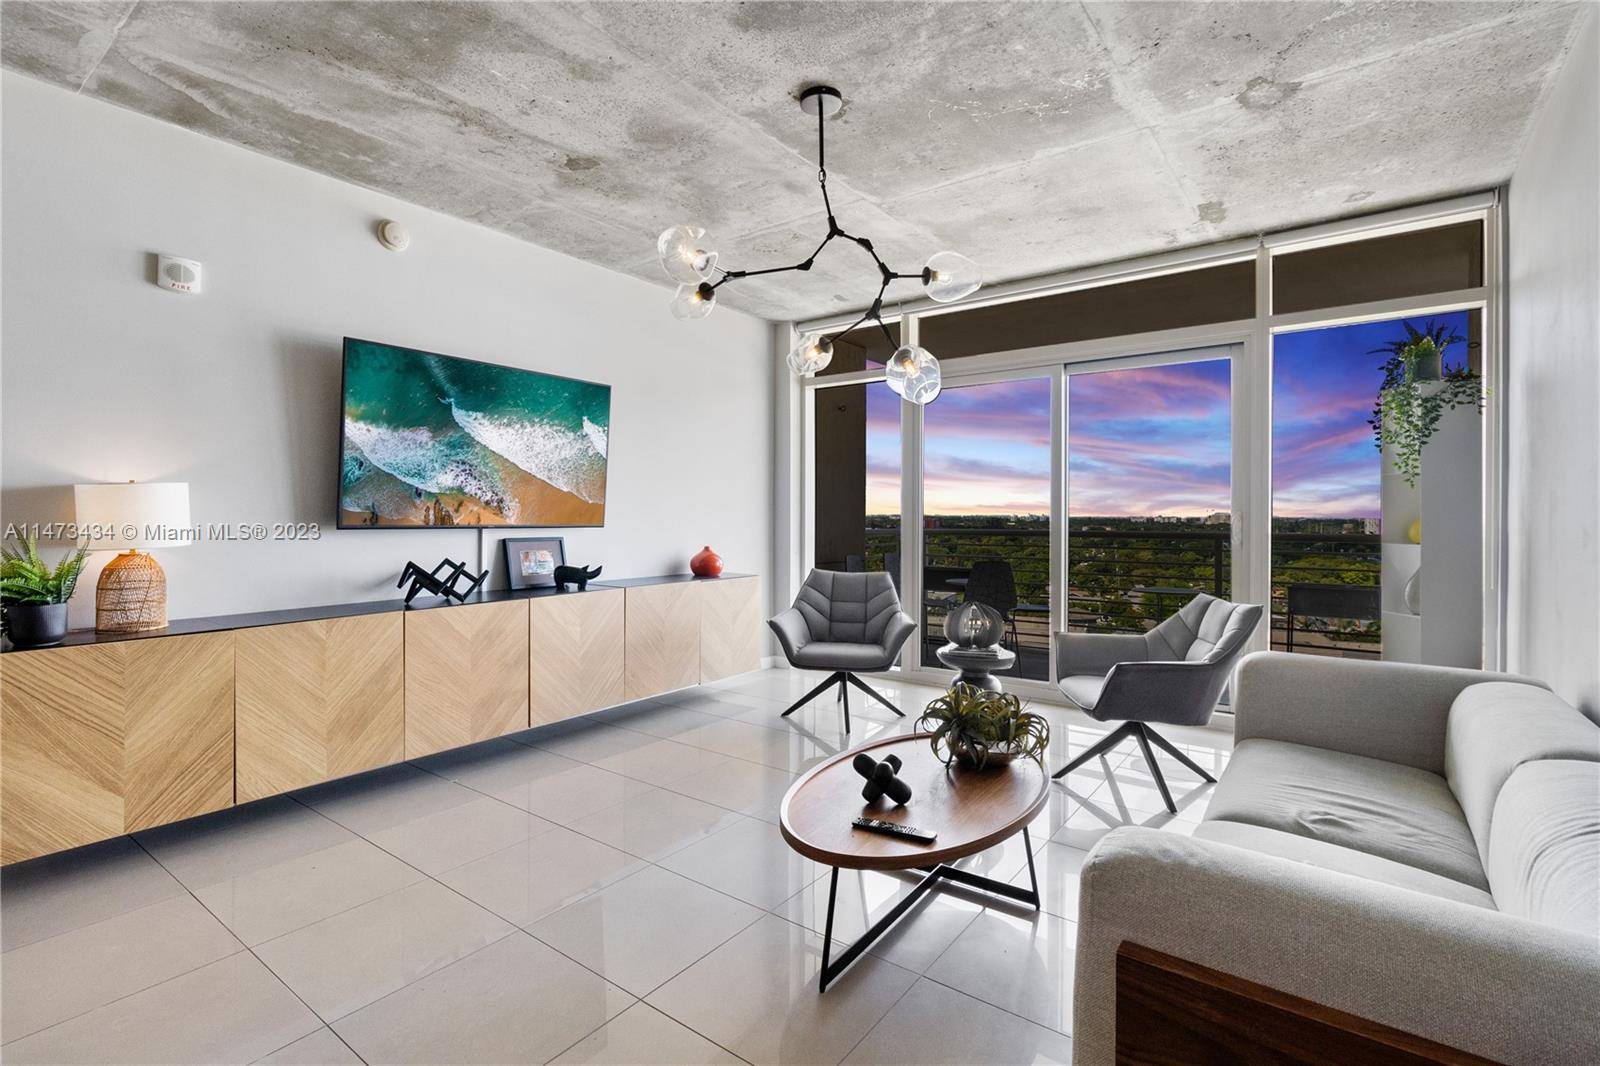 FULLY FURNISHED EQUIPPED 1 BEDROOM CONDO IN TRENDY MIDTOWN MIAMI !